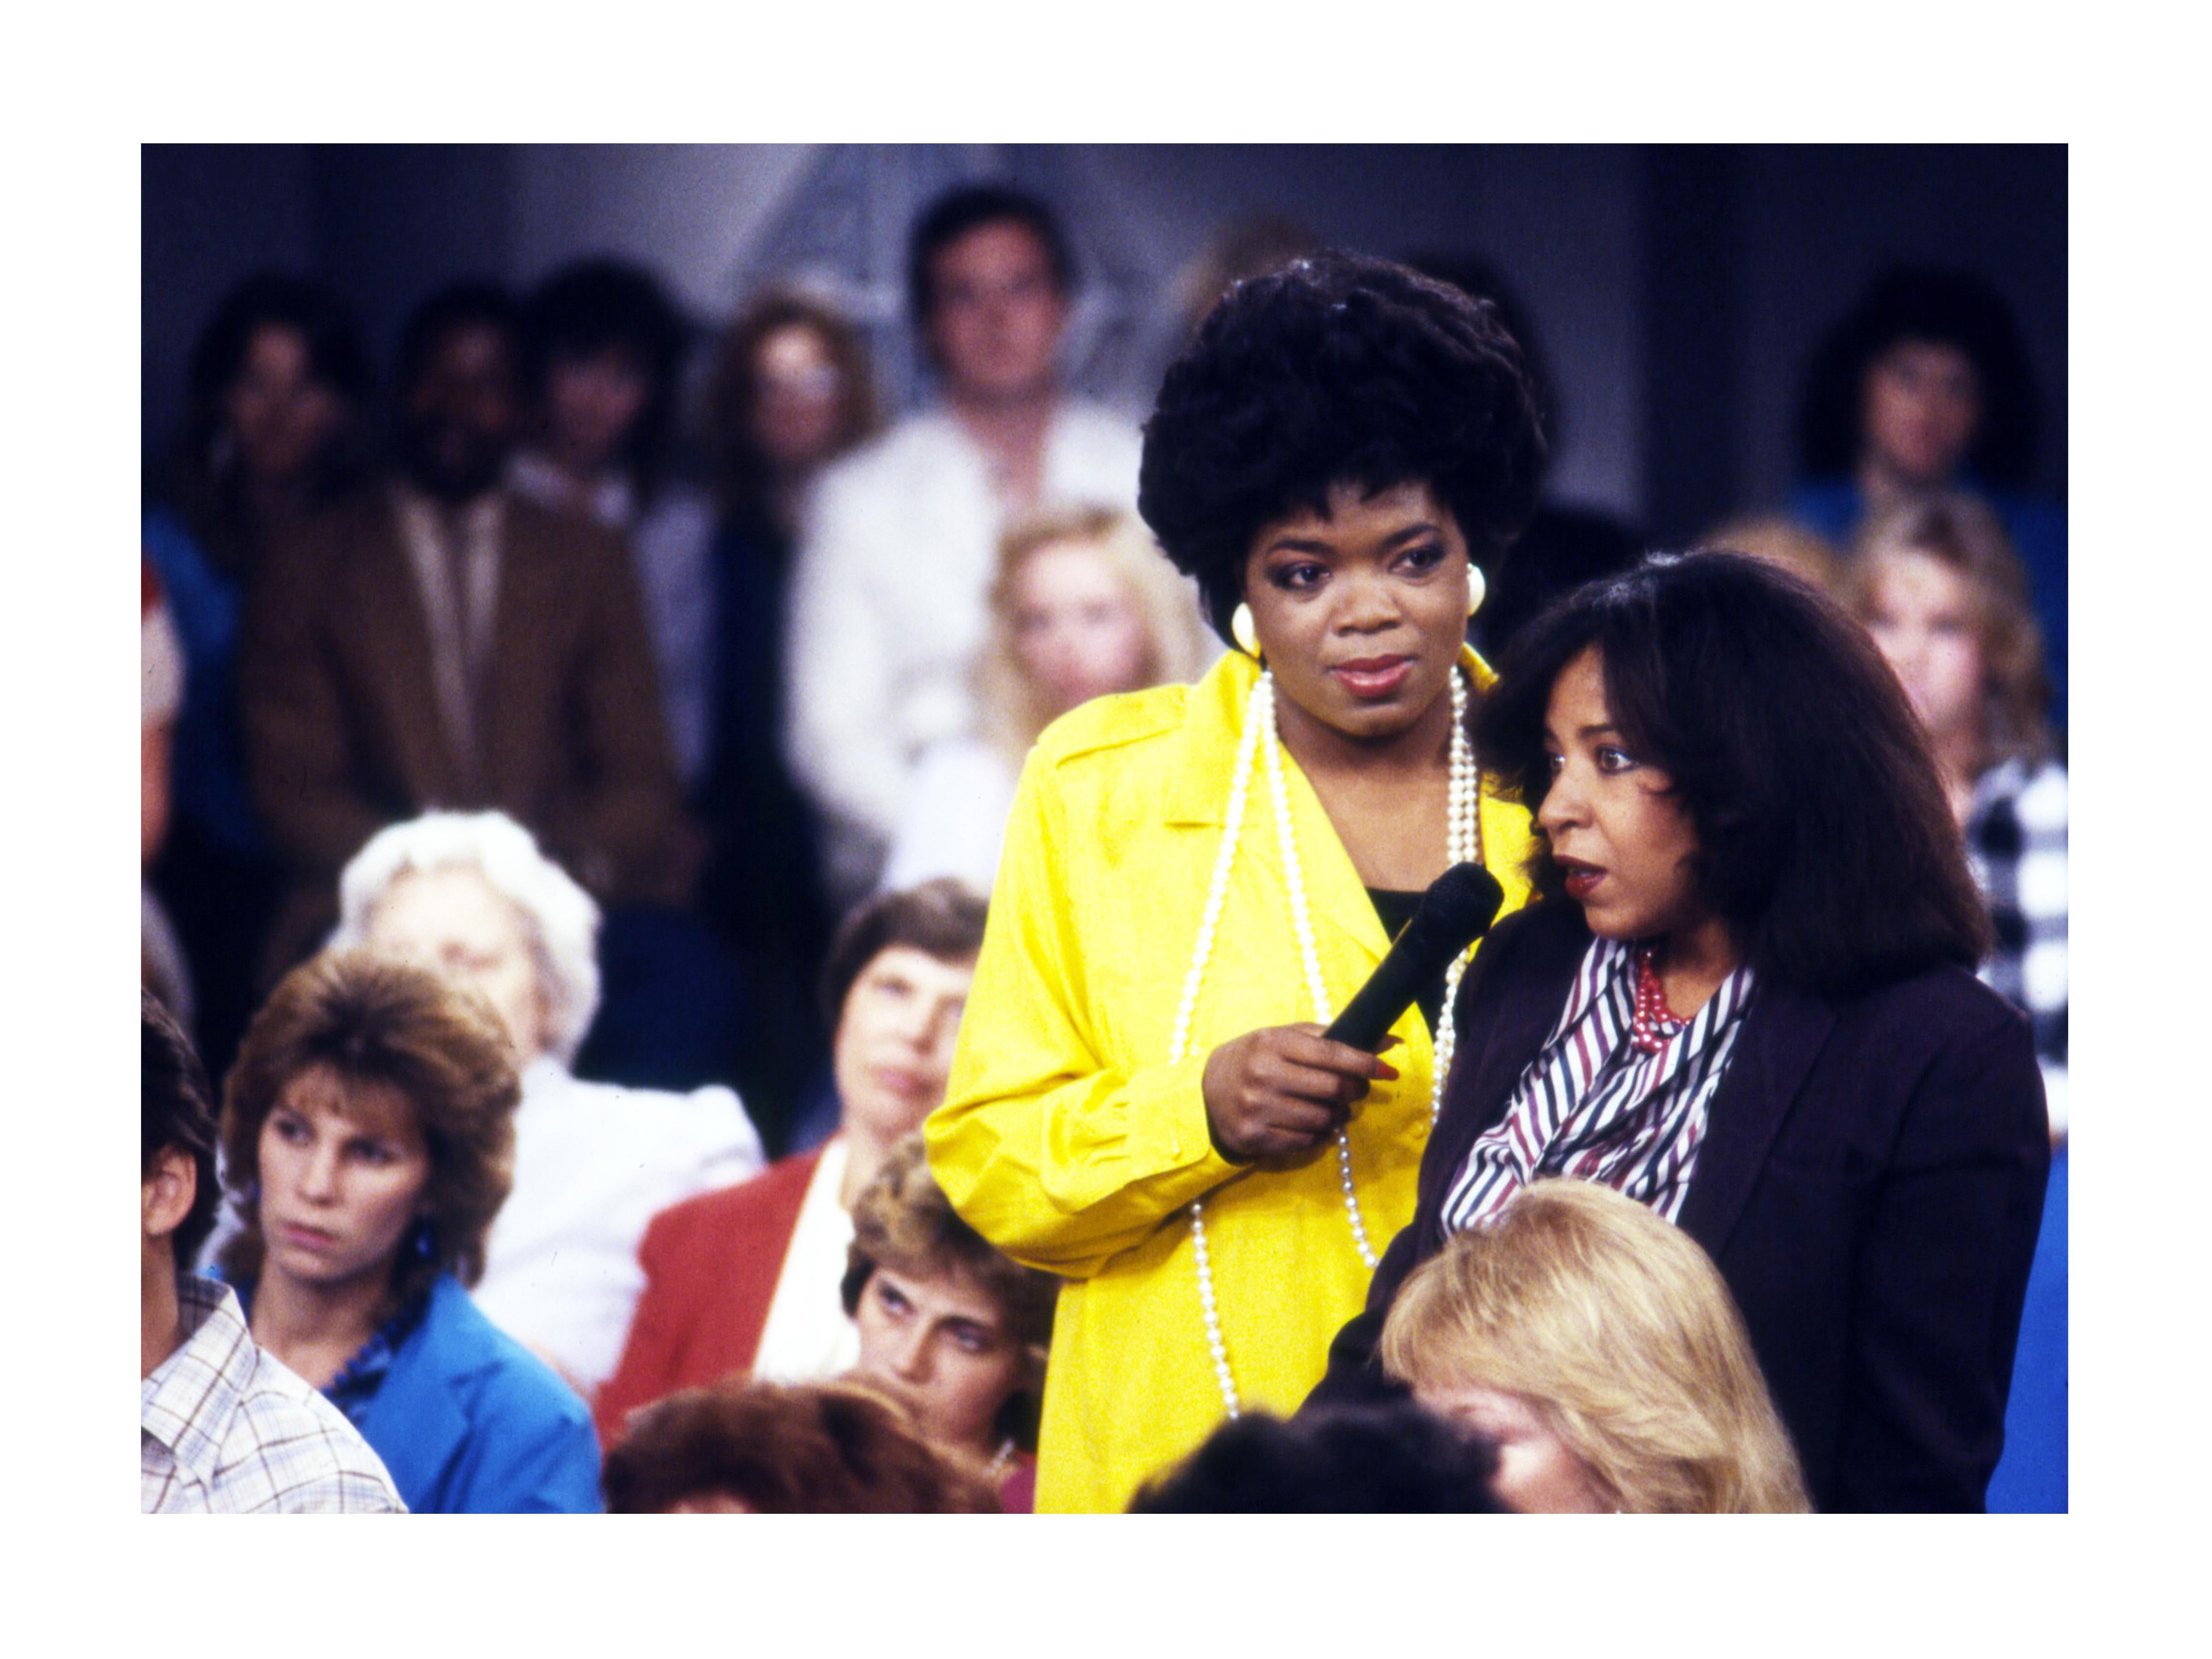 Richard Shay Portrait Photograph - Oprah Winfrey on AM Chicago, 1985 - Color Photograph, Matted and Framed